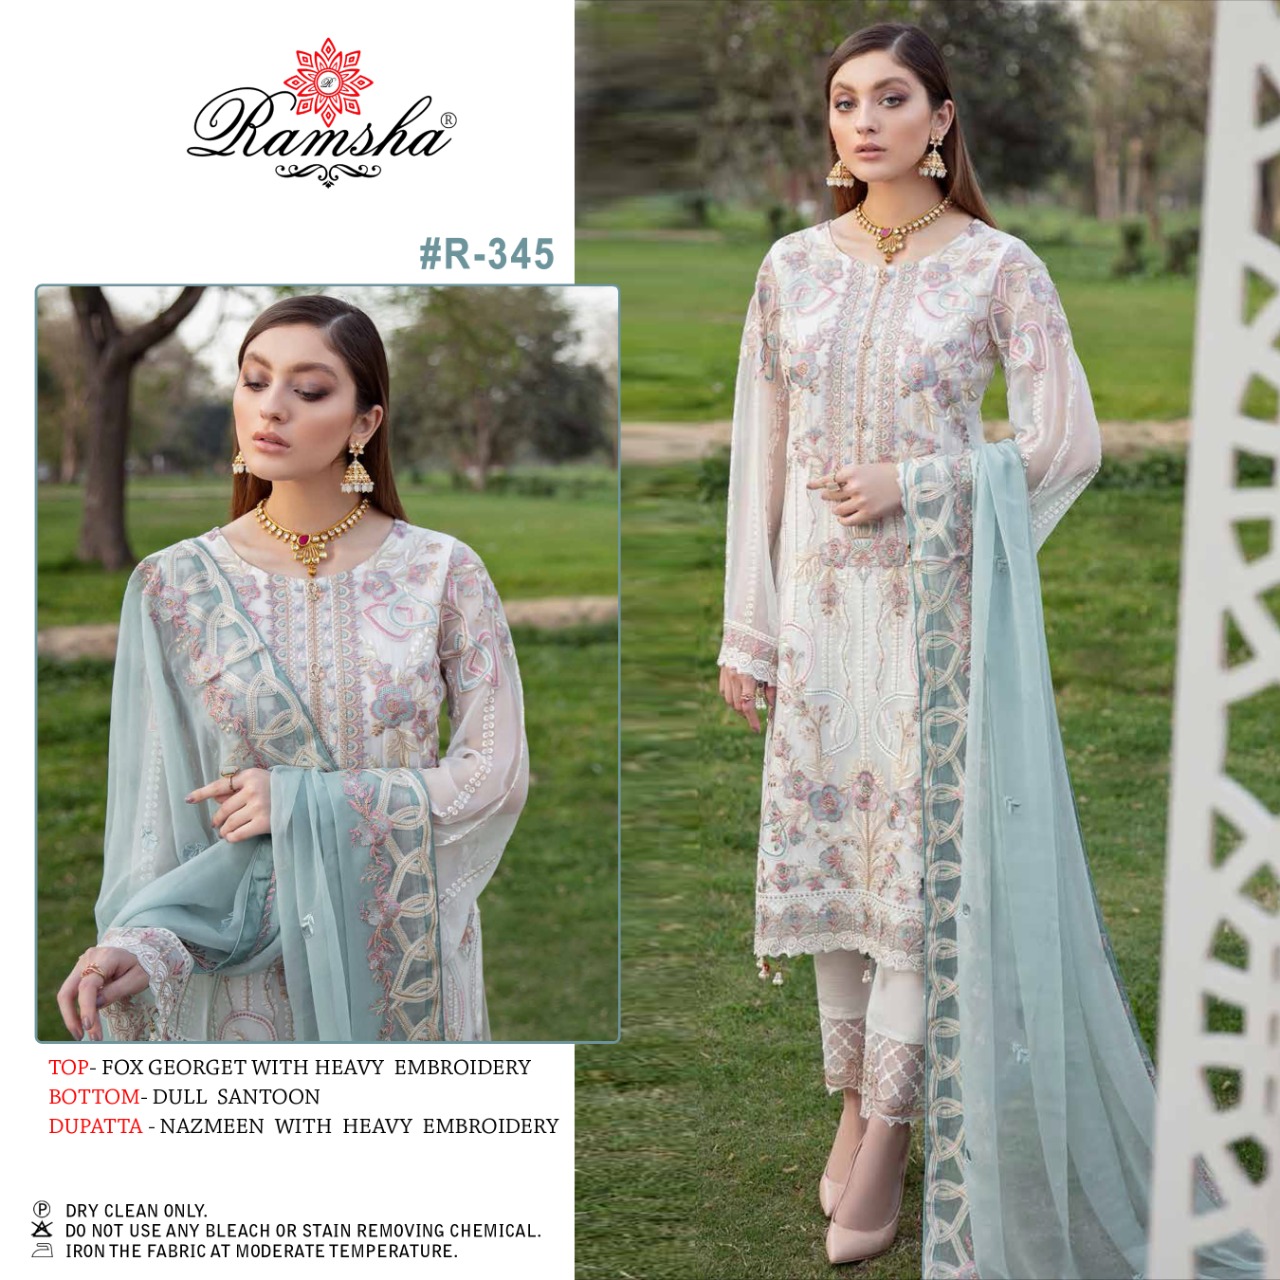 Ramsha R 343 To R 346 Georgette With Embroidery Pakistani Salwar Suits Catalog